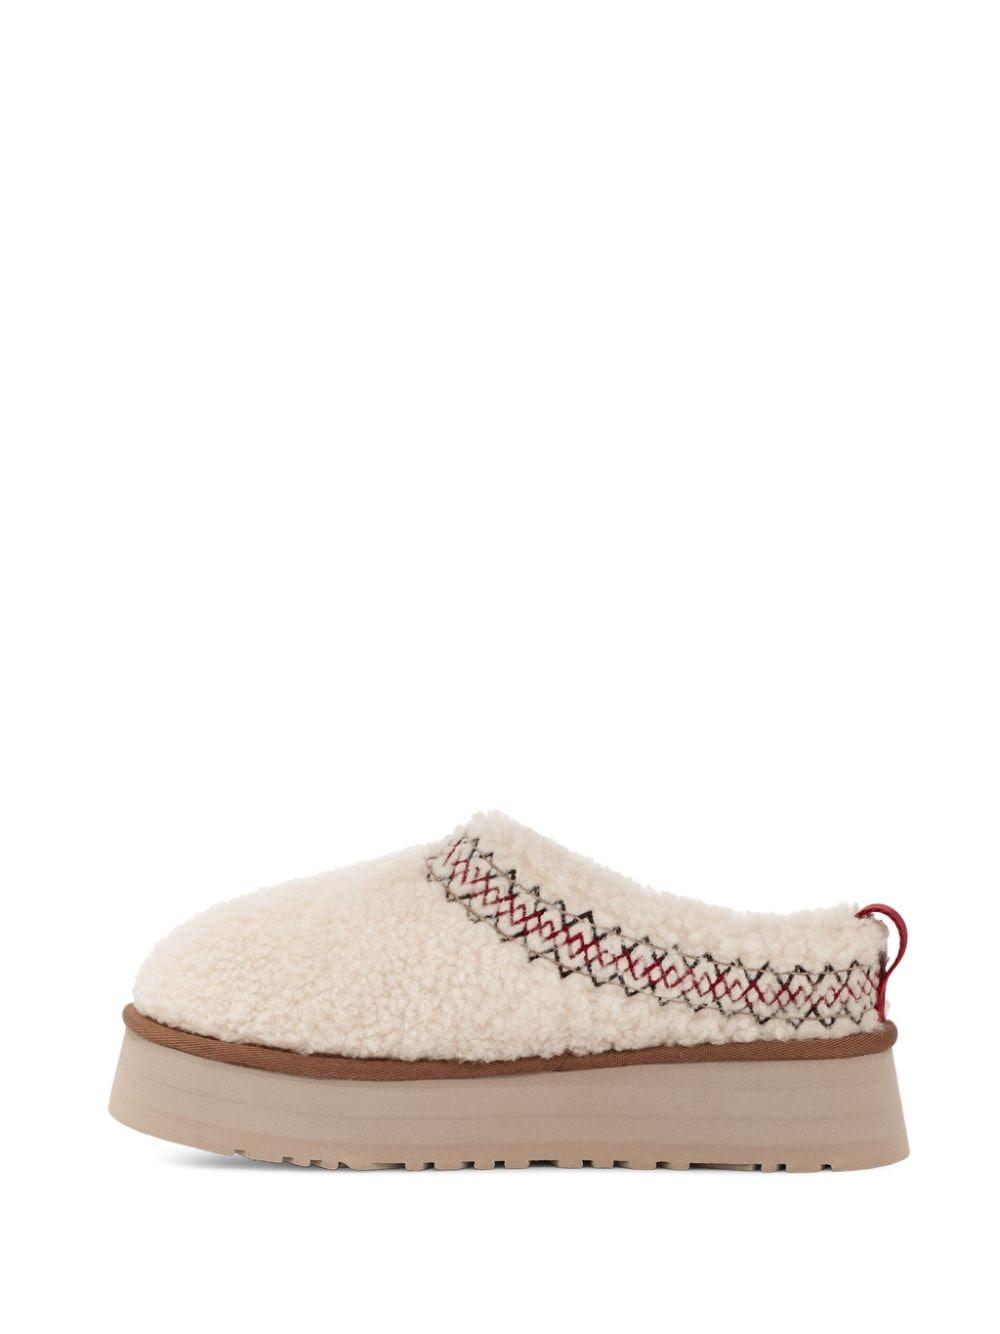 UGG Tazz Platform Slippers in Natural | Lyst